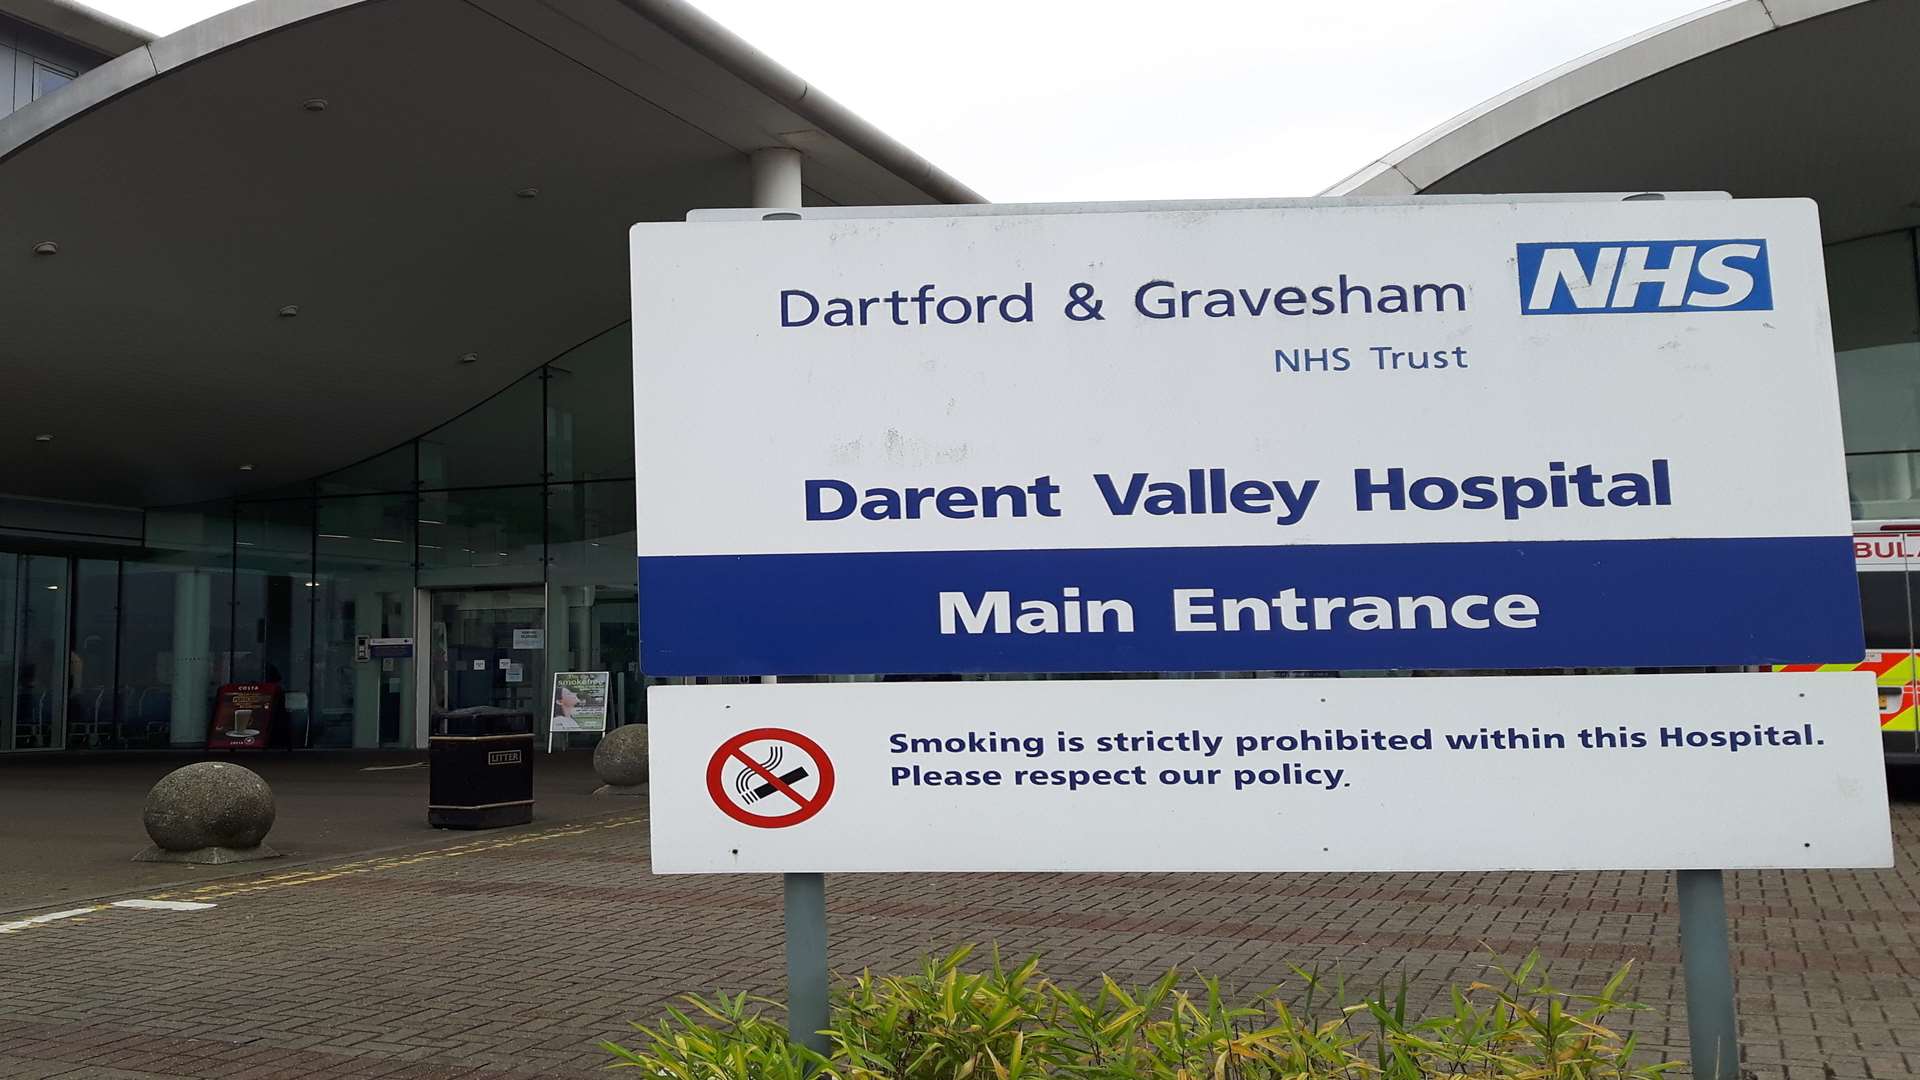 Darent Valley Hospital saw a four-fold increase in incidents